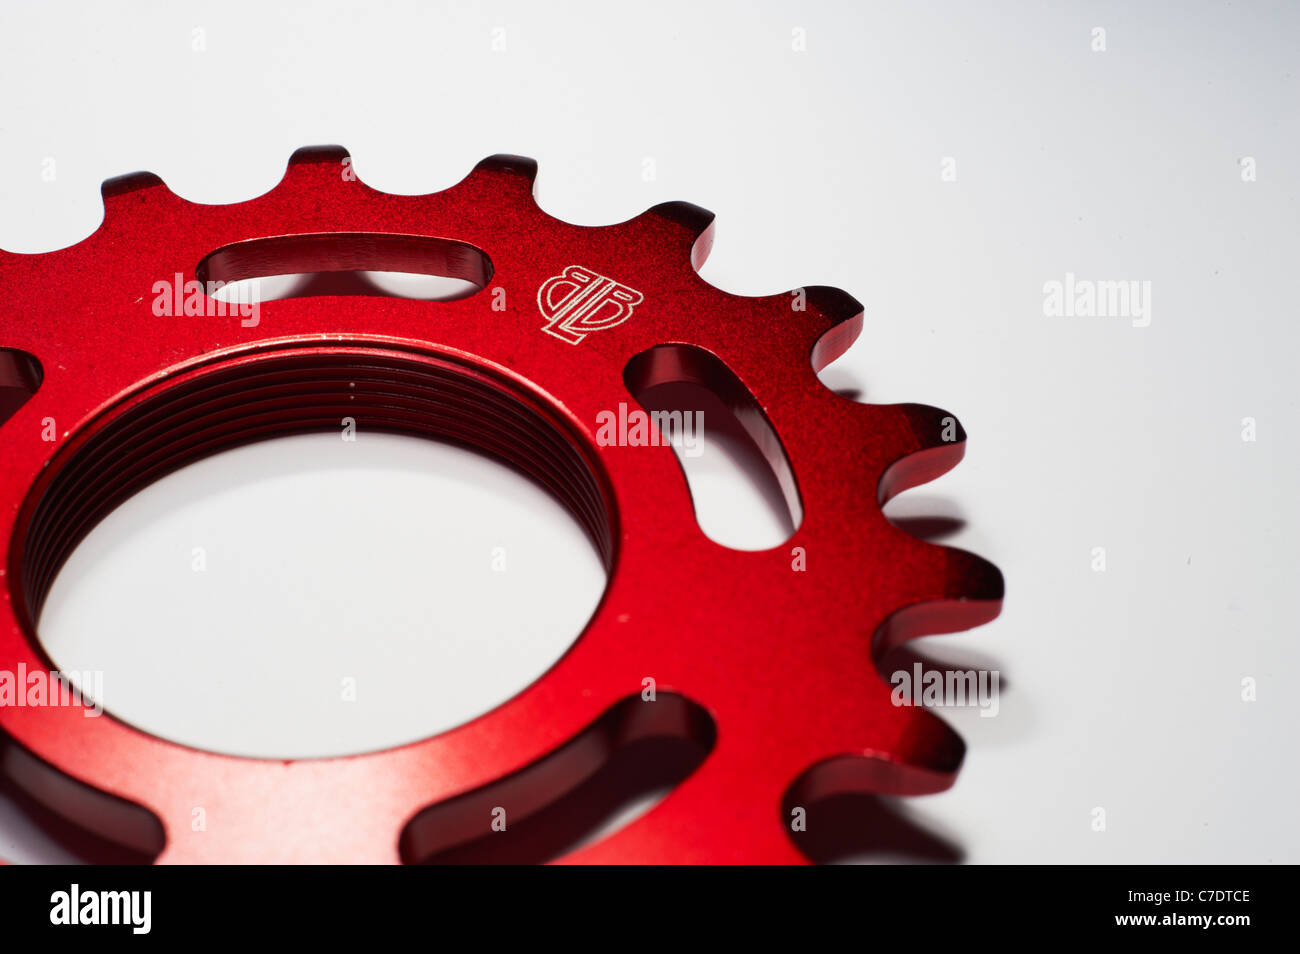 red anodised fixed gear sprocket Stock Photo